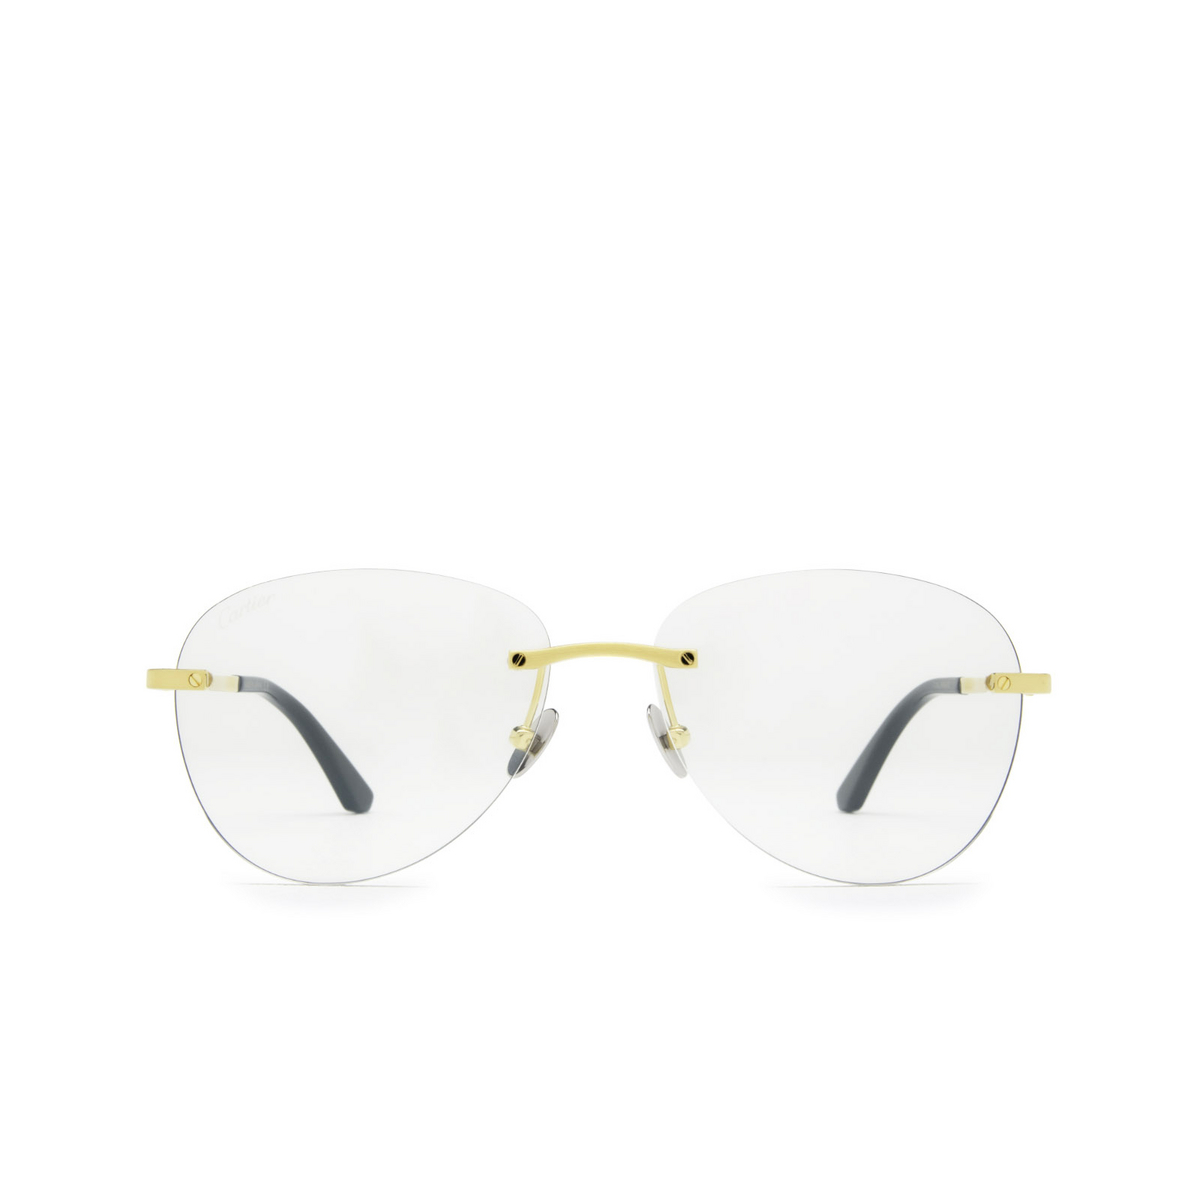 Cartier® Oval Sunglasses: CT0254S color Gold 001 - front view.